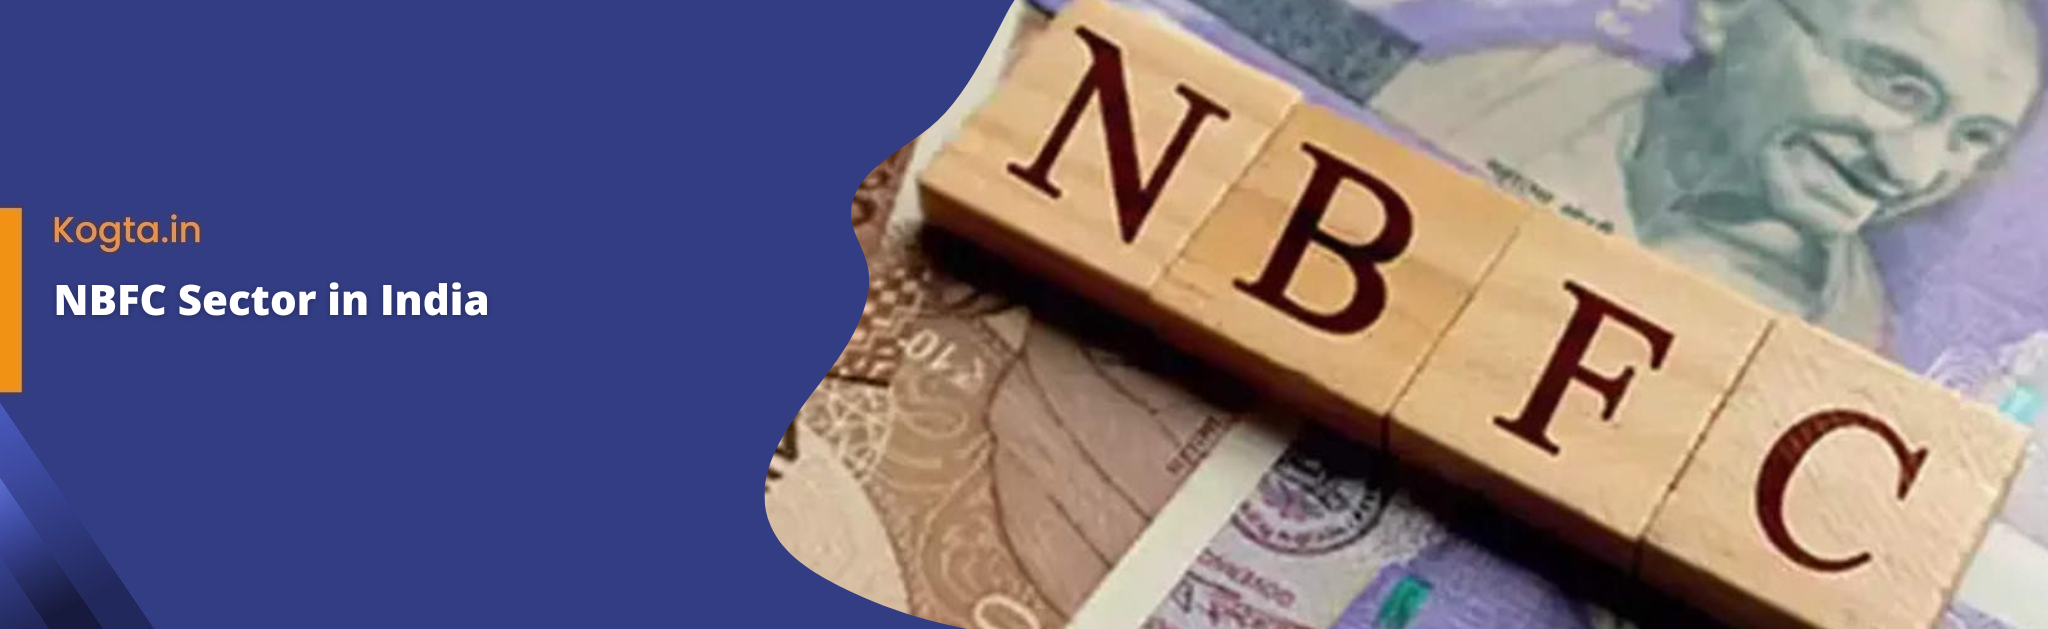 NBFC Sector in India